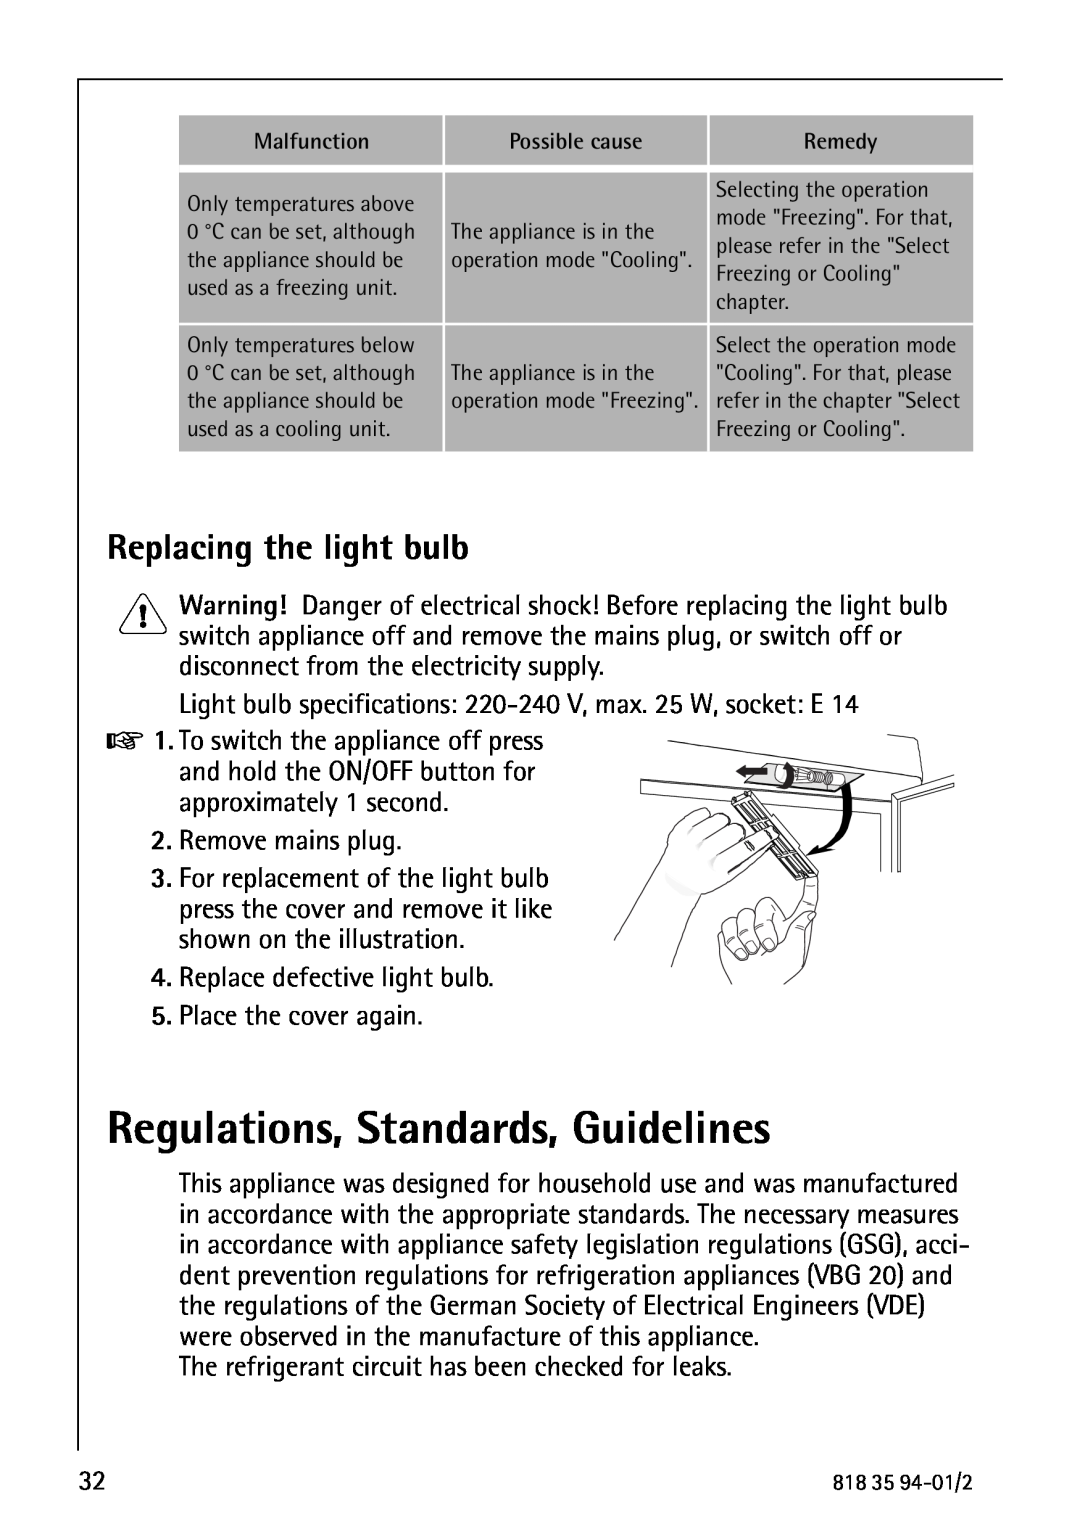 Electrolux U31462 operating instructions Regulations, Standards, Guidelines, Replacing the light bulb 